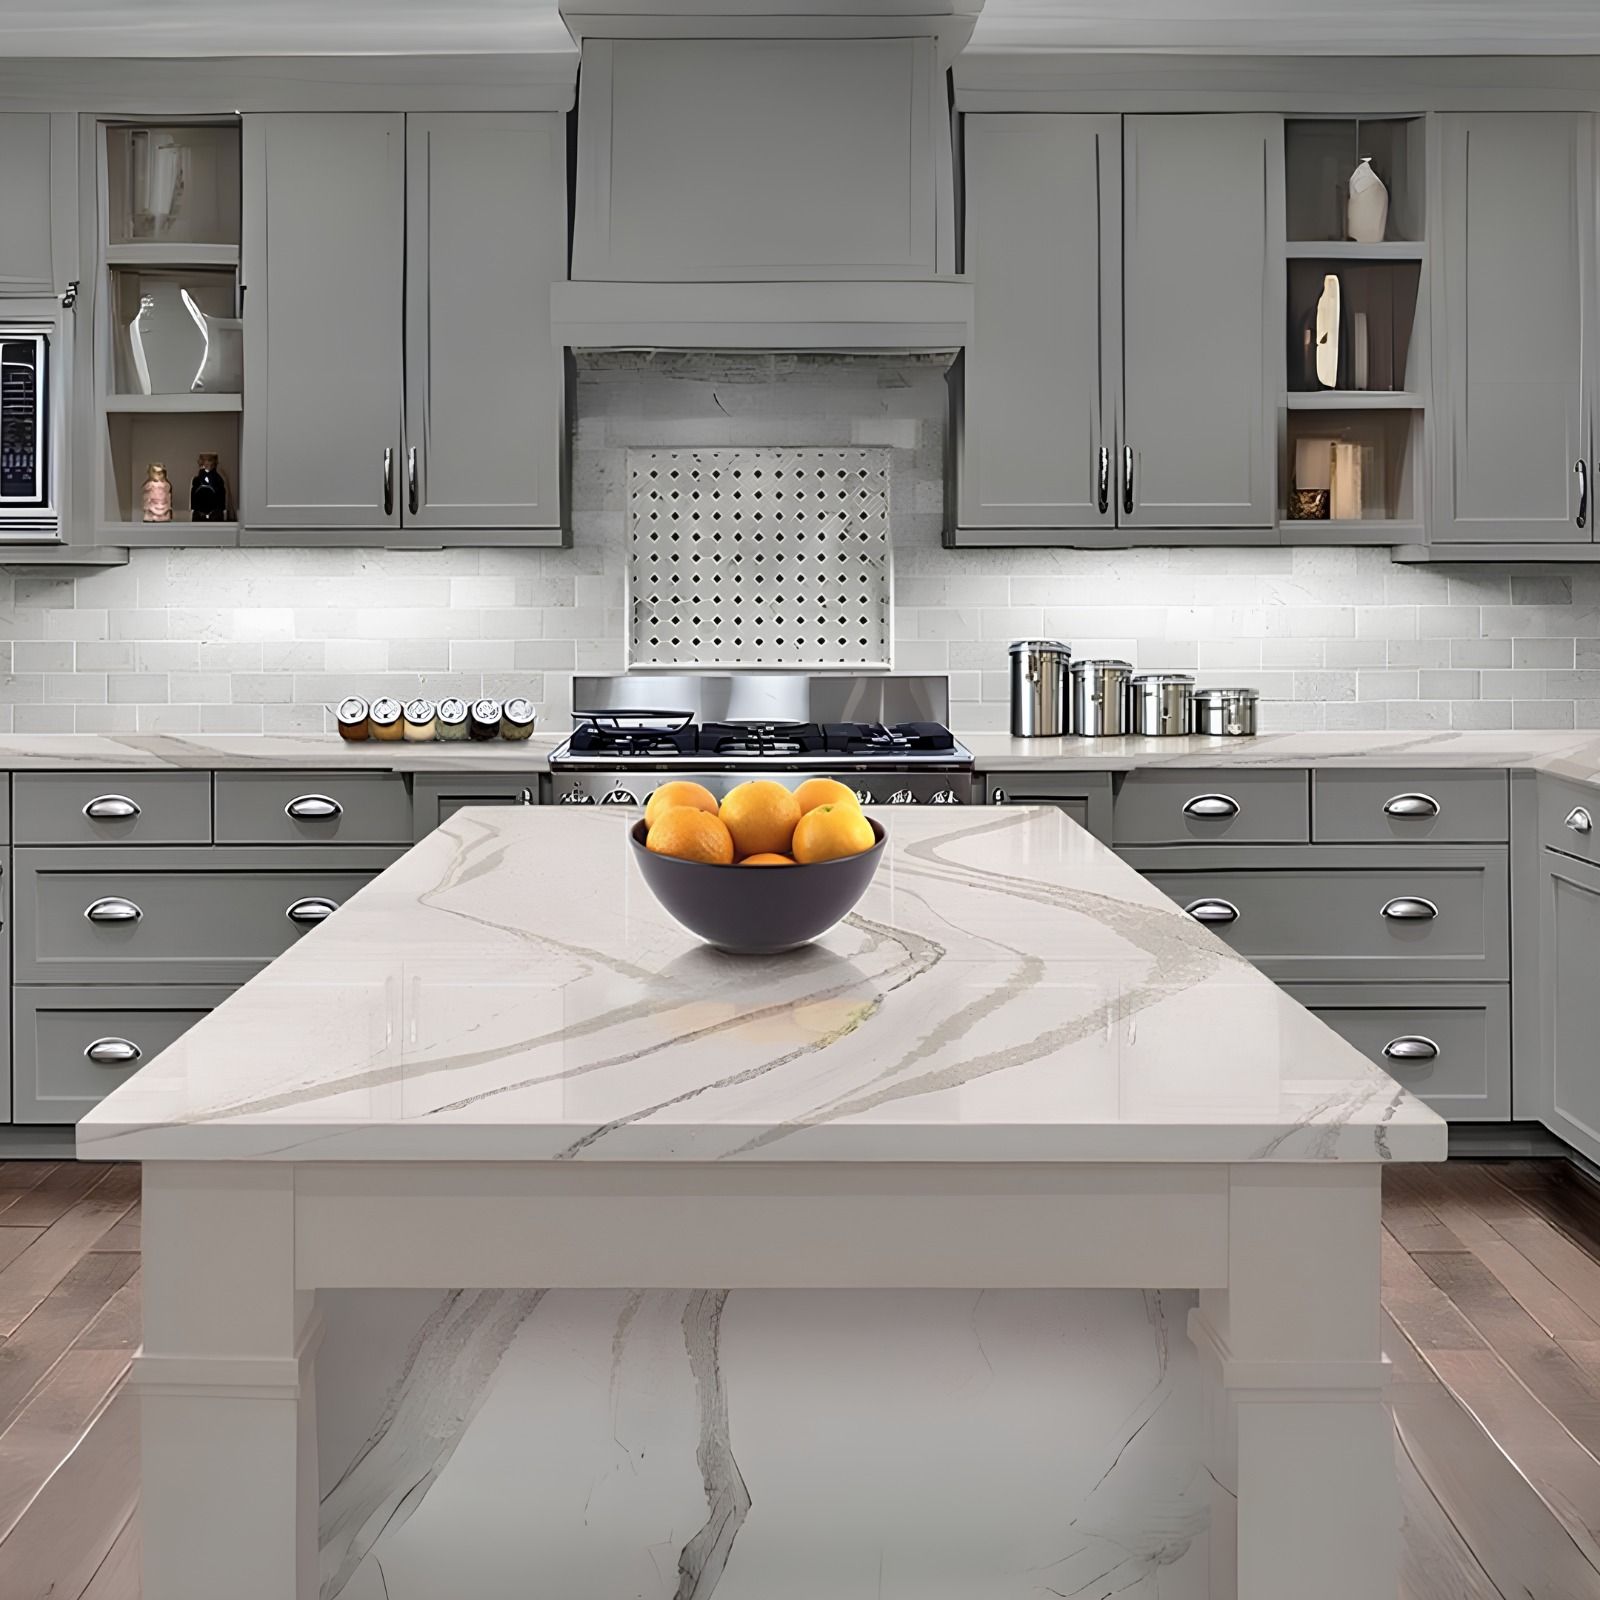 Do Engineered Quartz Countertops Stain? - Use Natural Stone